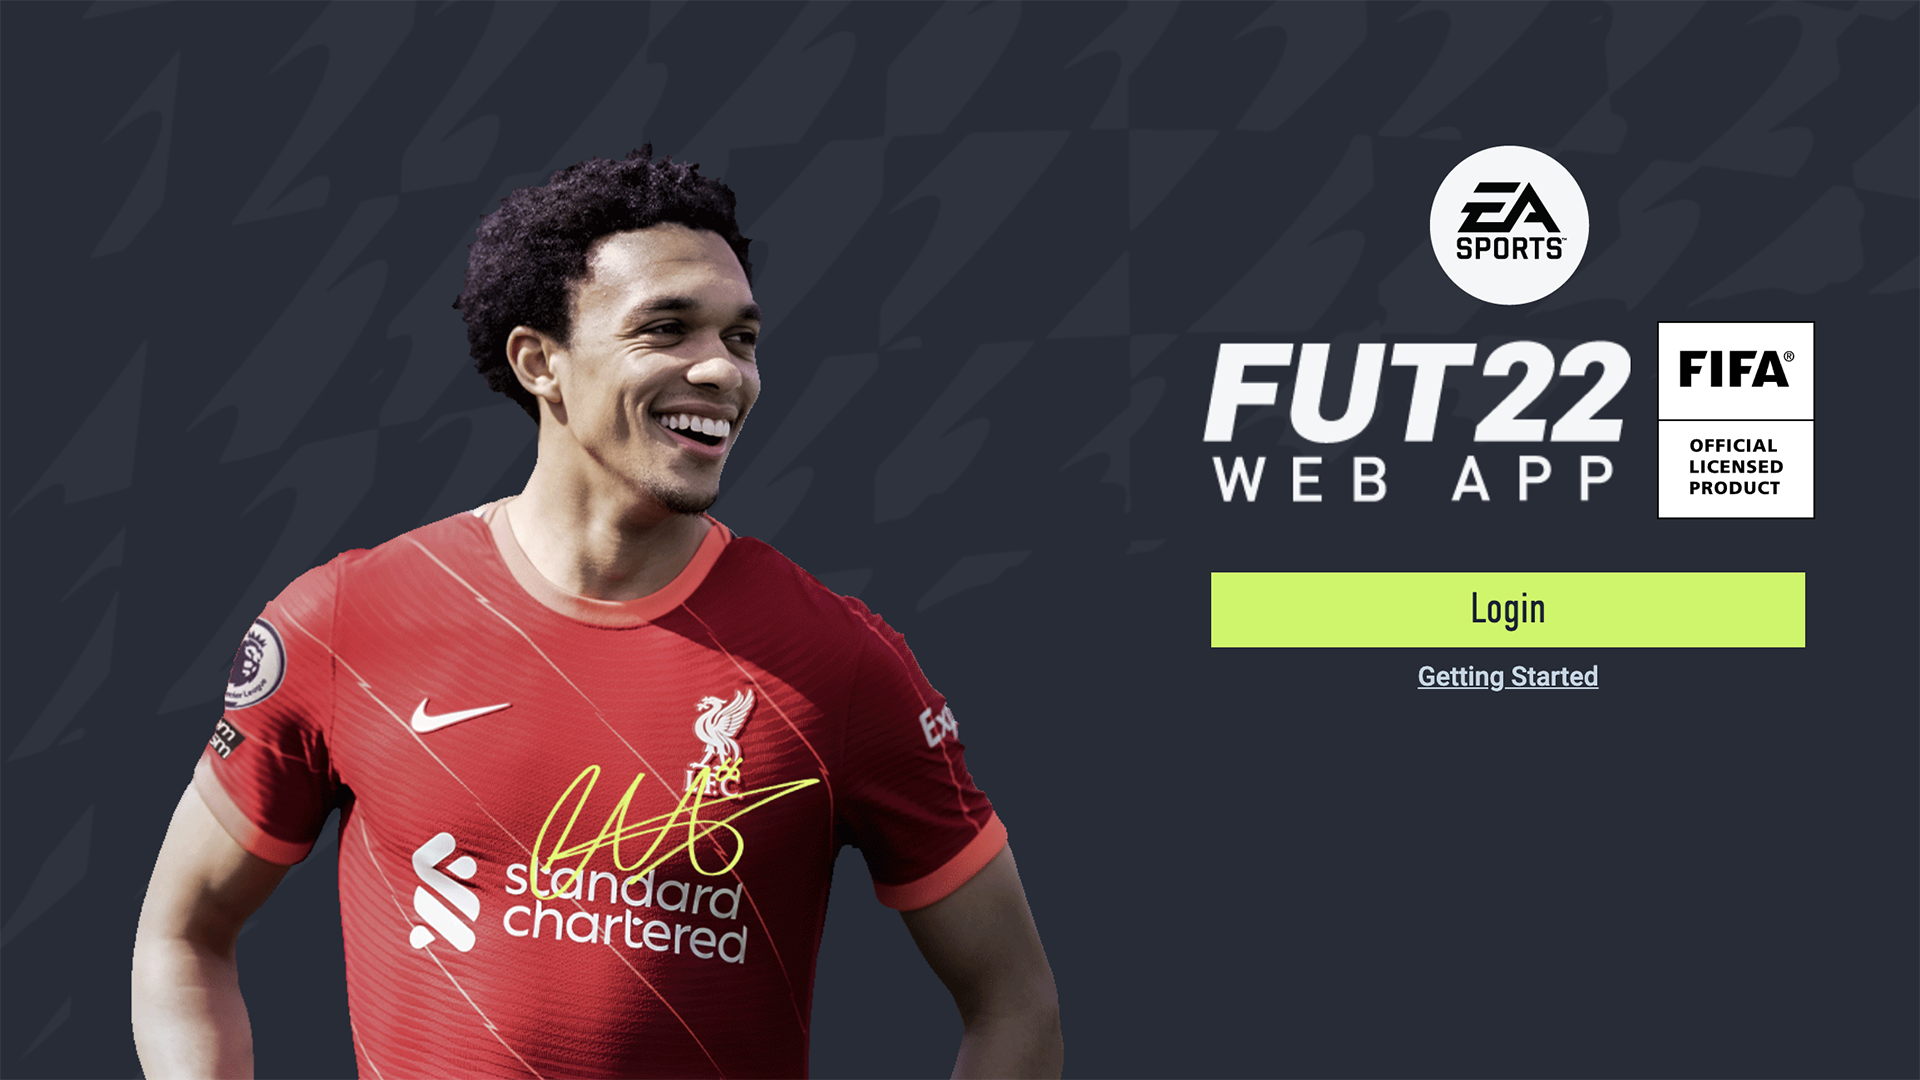 FIFA 22 Guide: The Six Best Tips